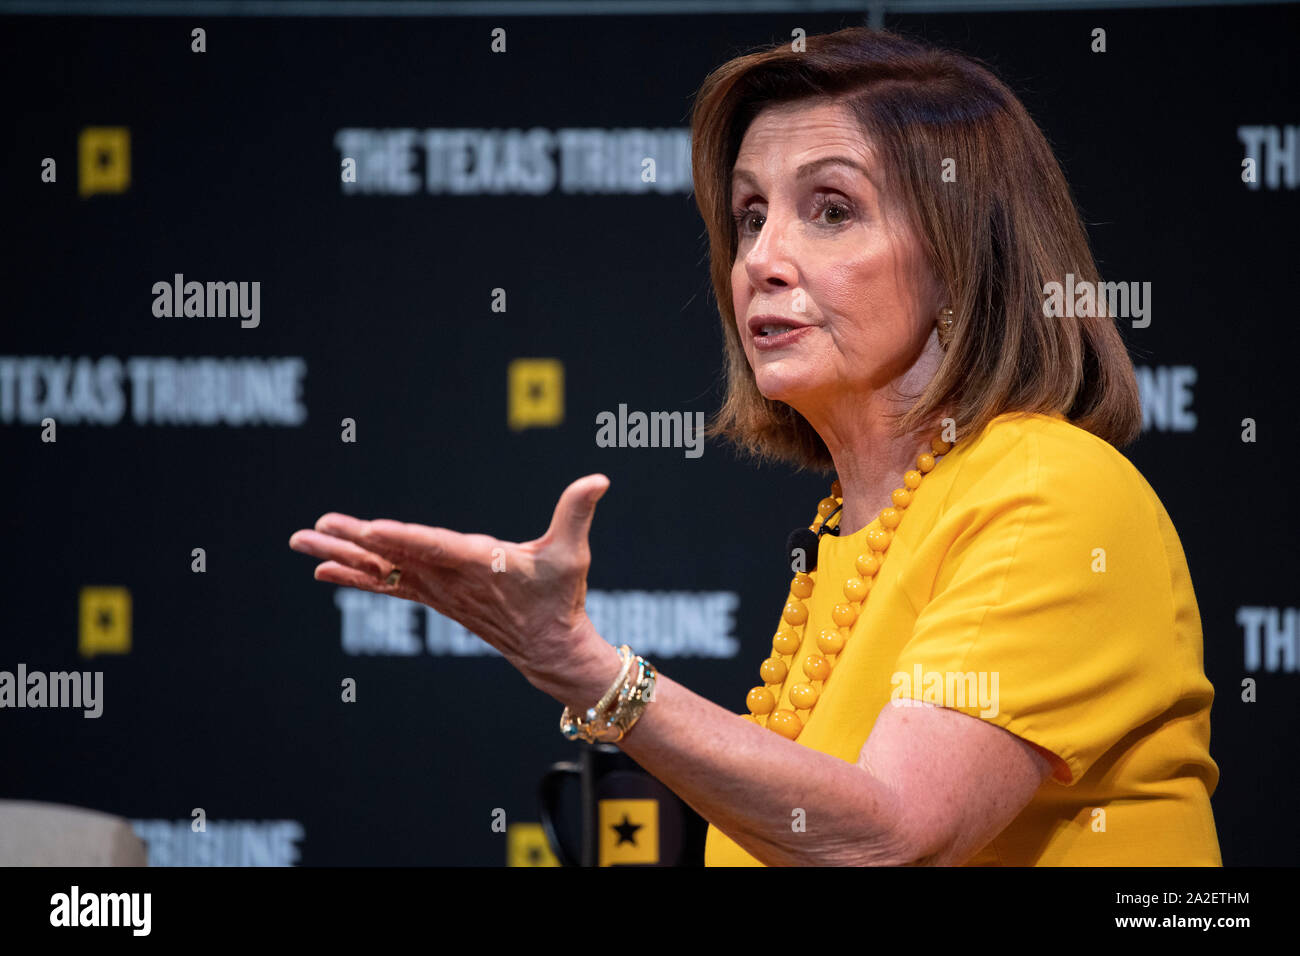 Speaker of the United States House of Representatives Nancy Pelosi, (D-CA) speaks during an interview at the Texas Tribune Festival in Austin, Texas. Stock Photo